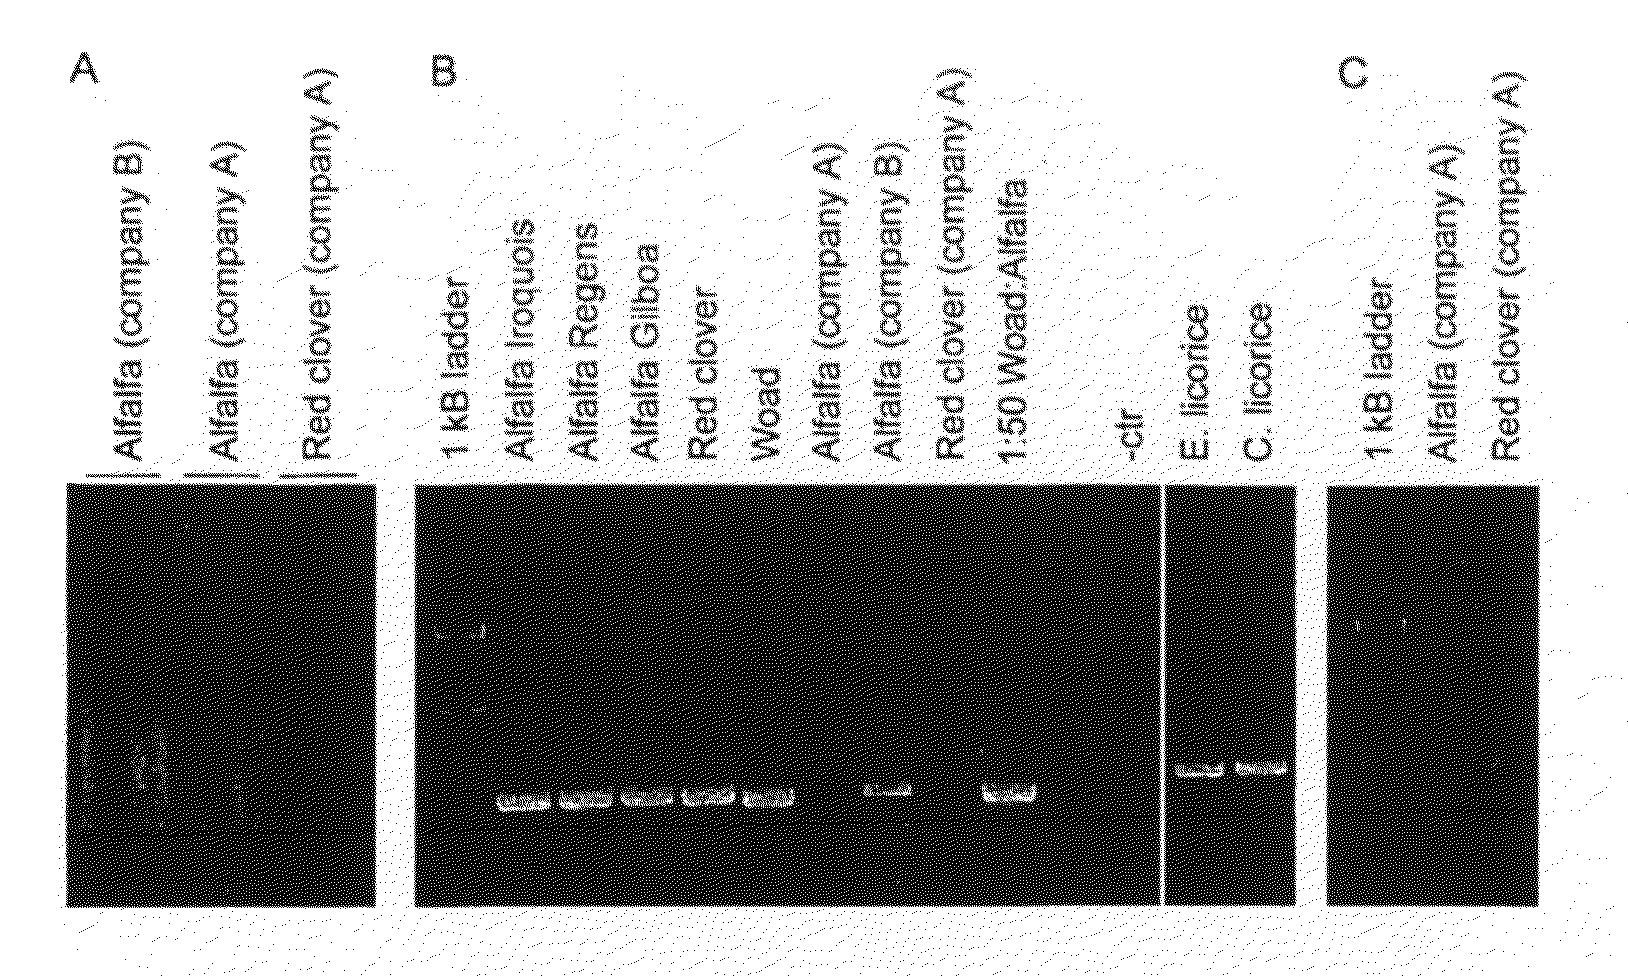 Use of pcr-based techniques to analyze compositions of botanicals